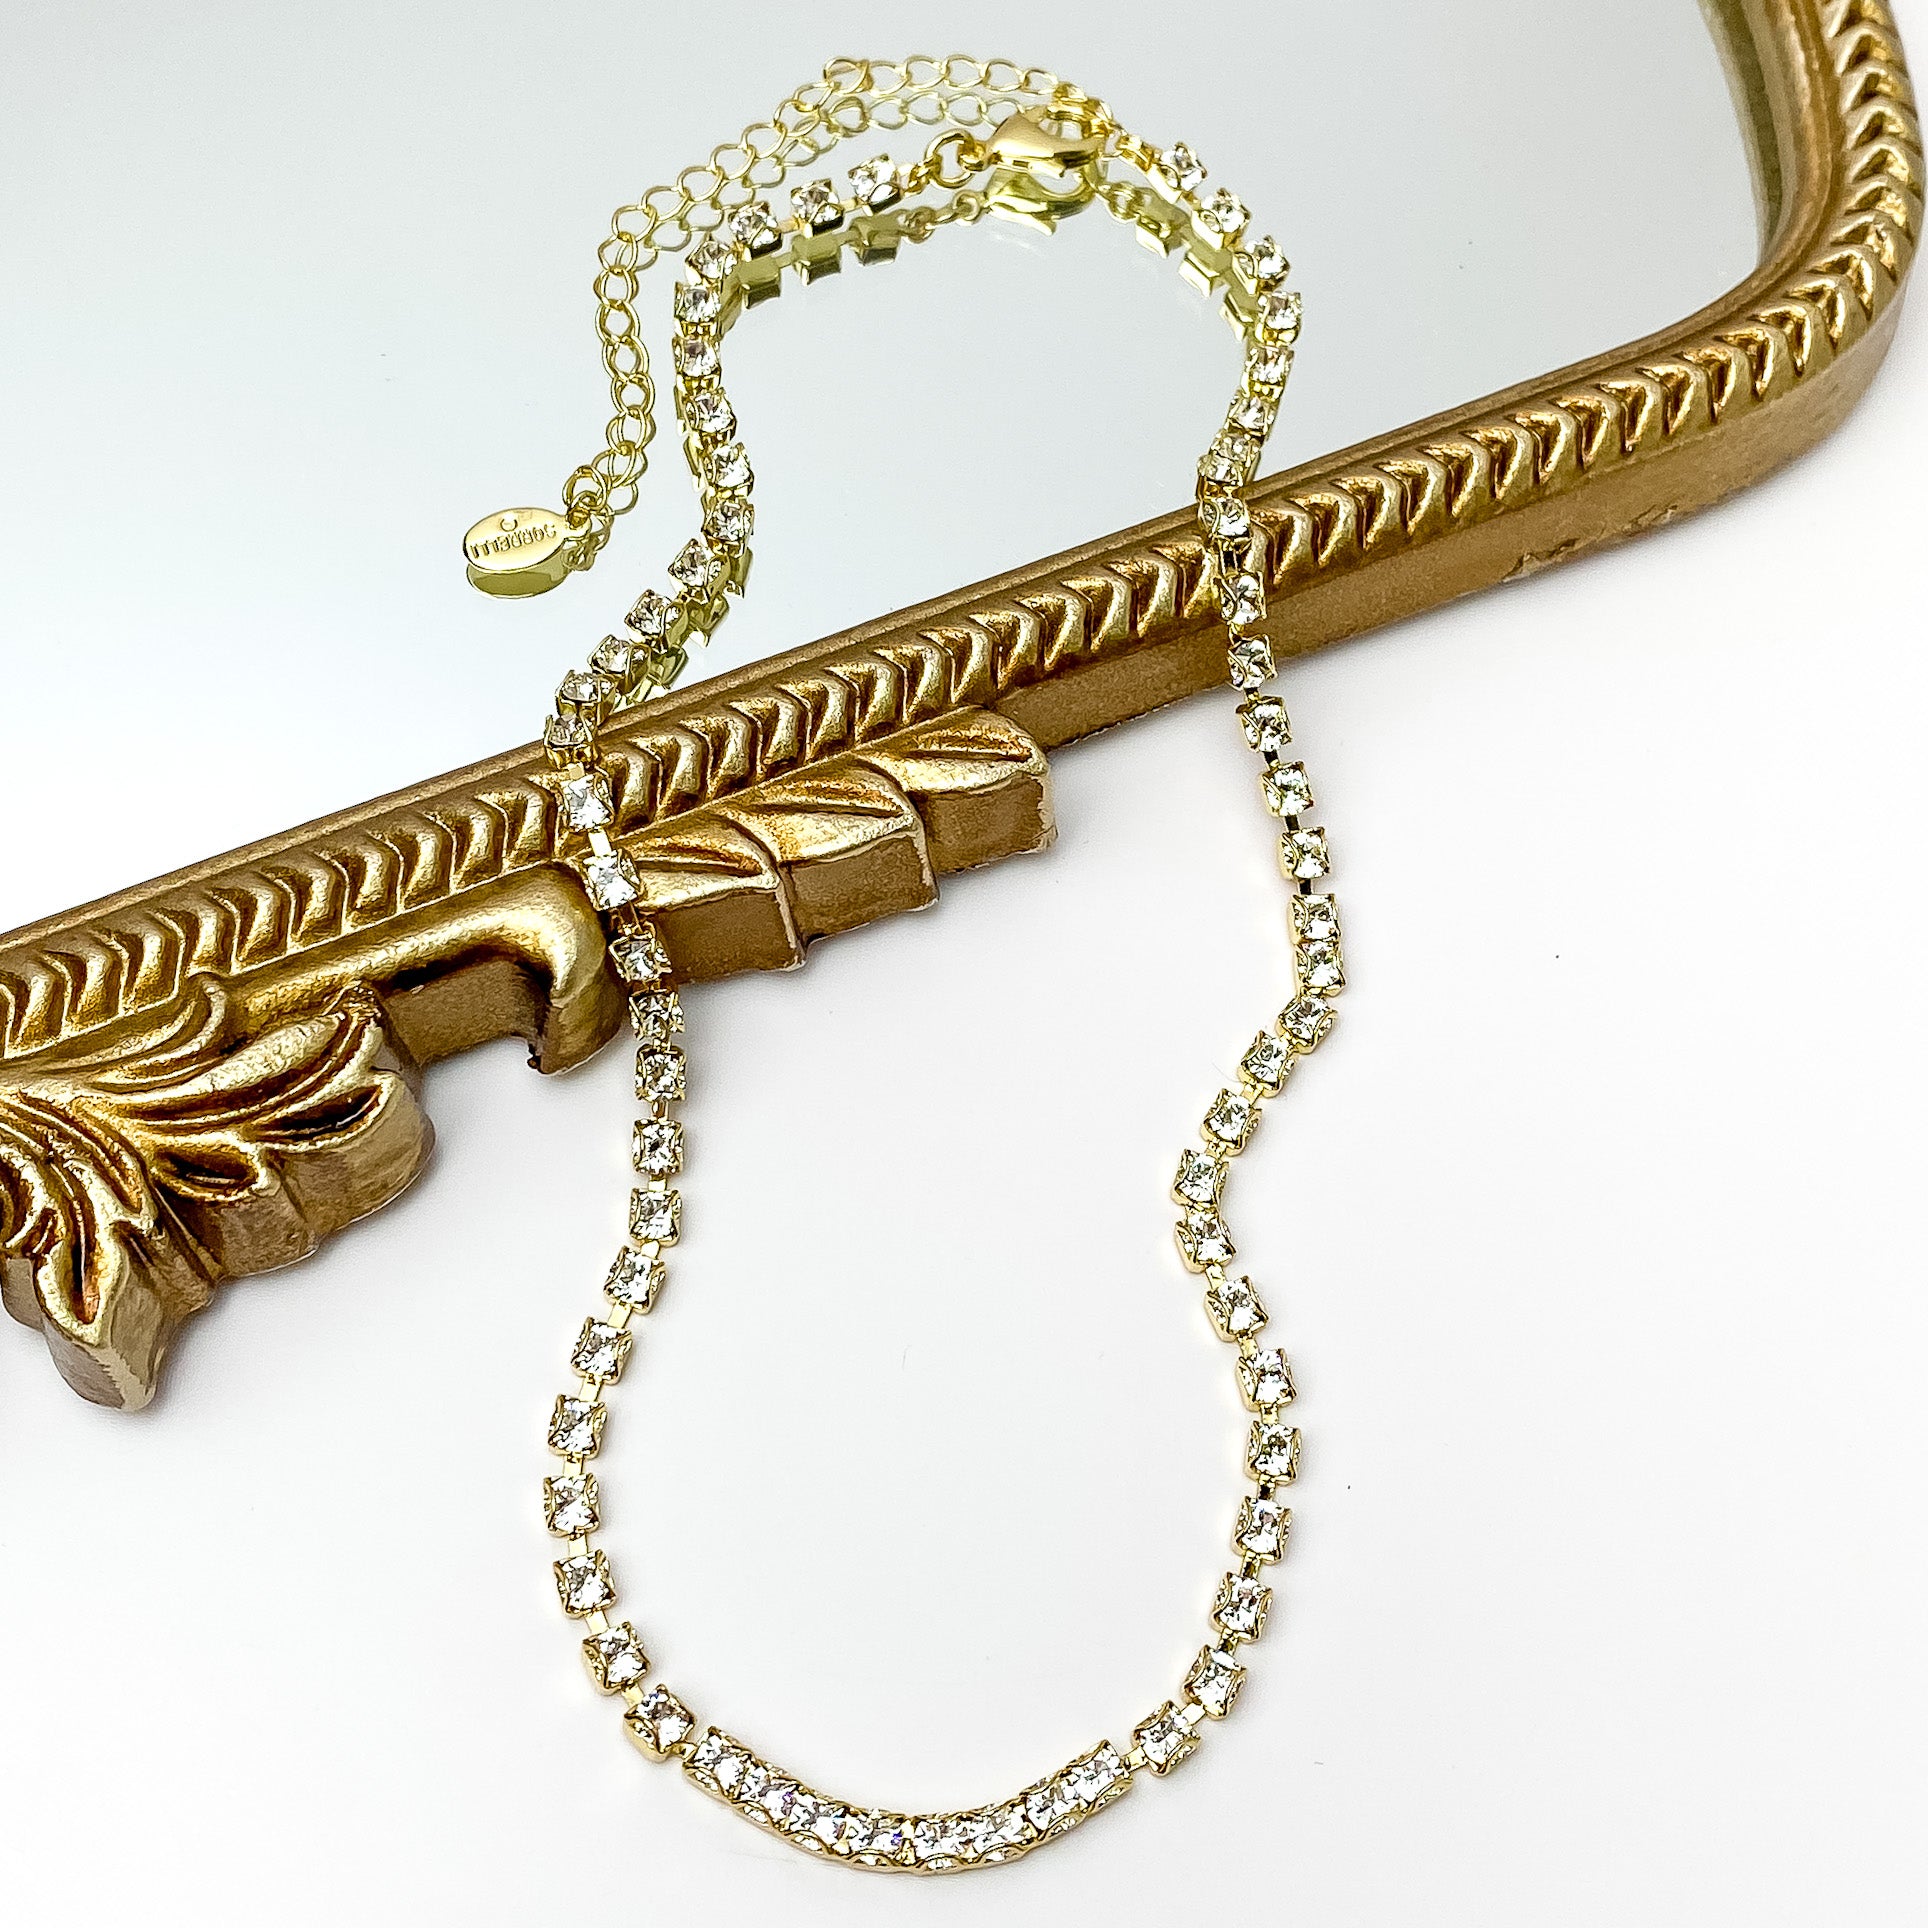 Pictured is a gold necklace with clear crystals. This necklace is pictured partially on a gold mirror on a white background.